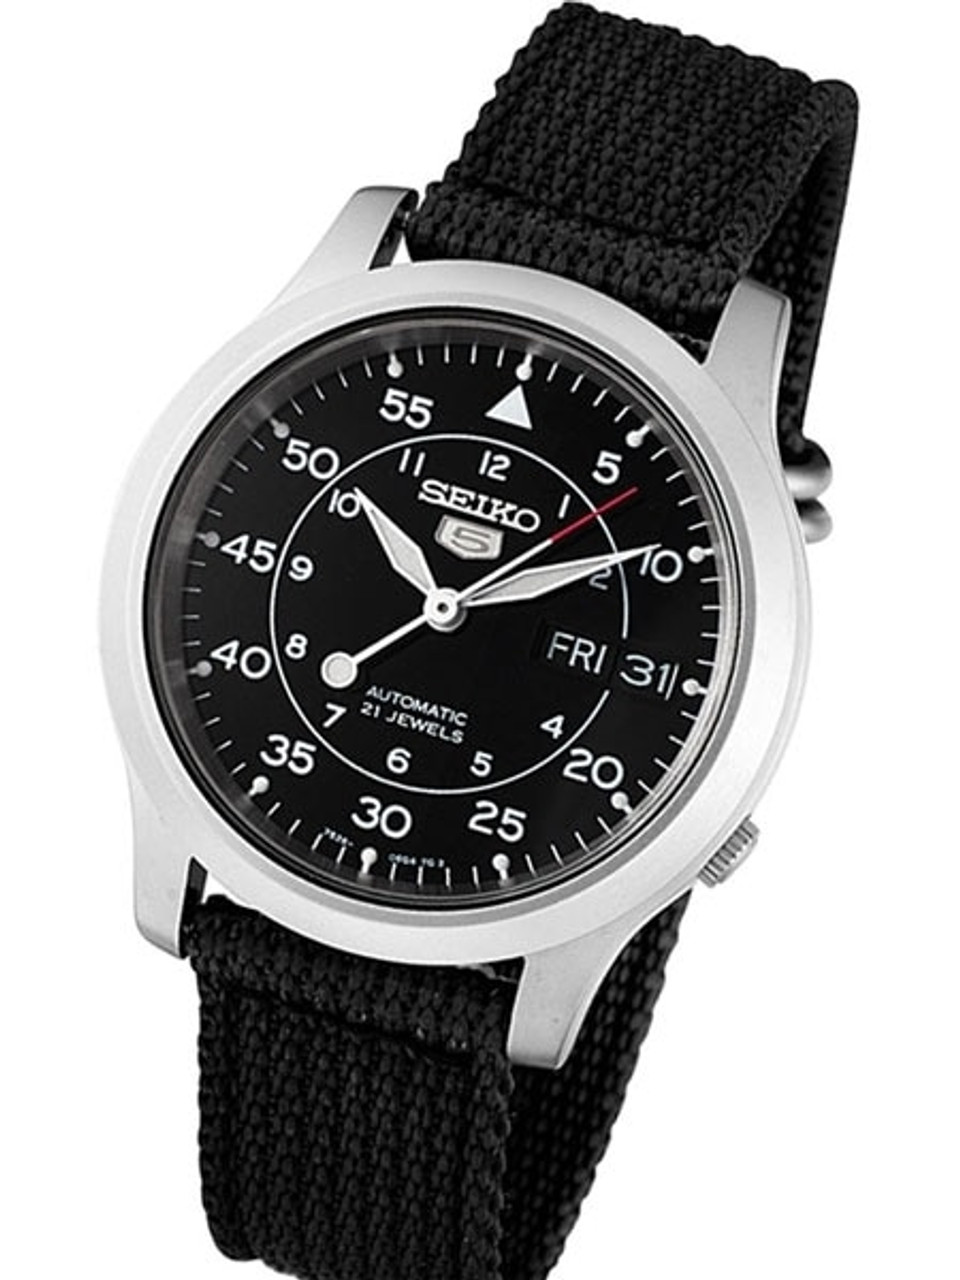 5 Military Black Dial Watch with Back Canvas Strap